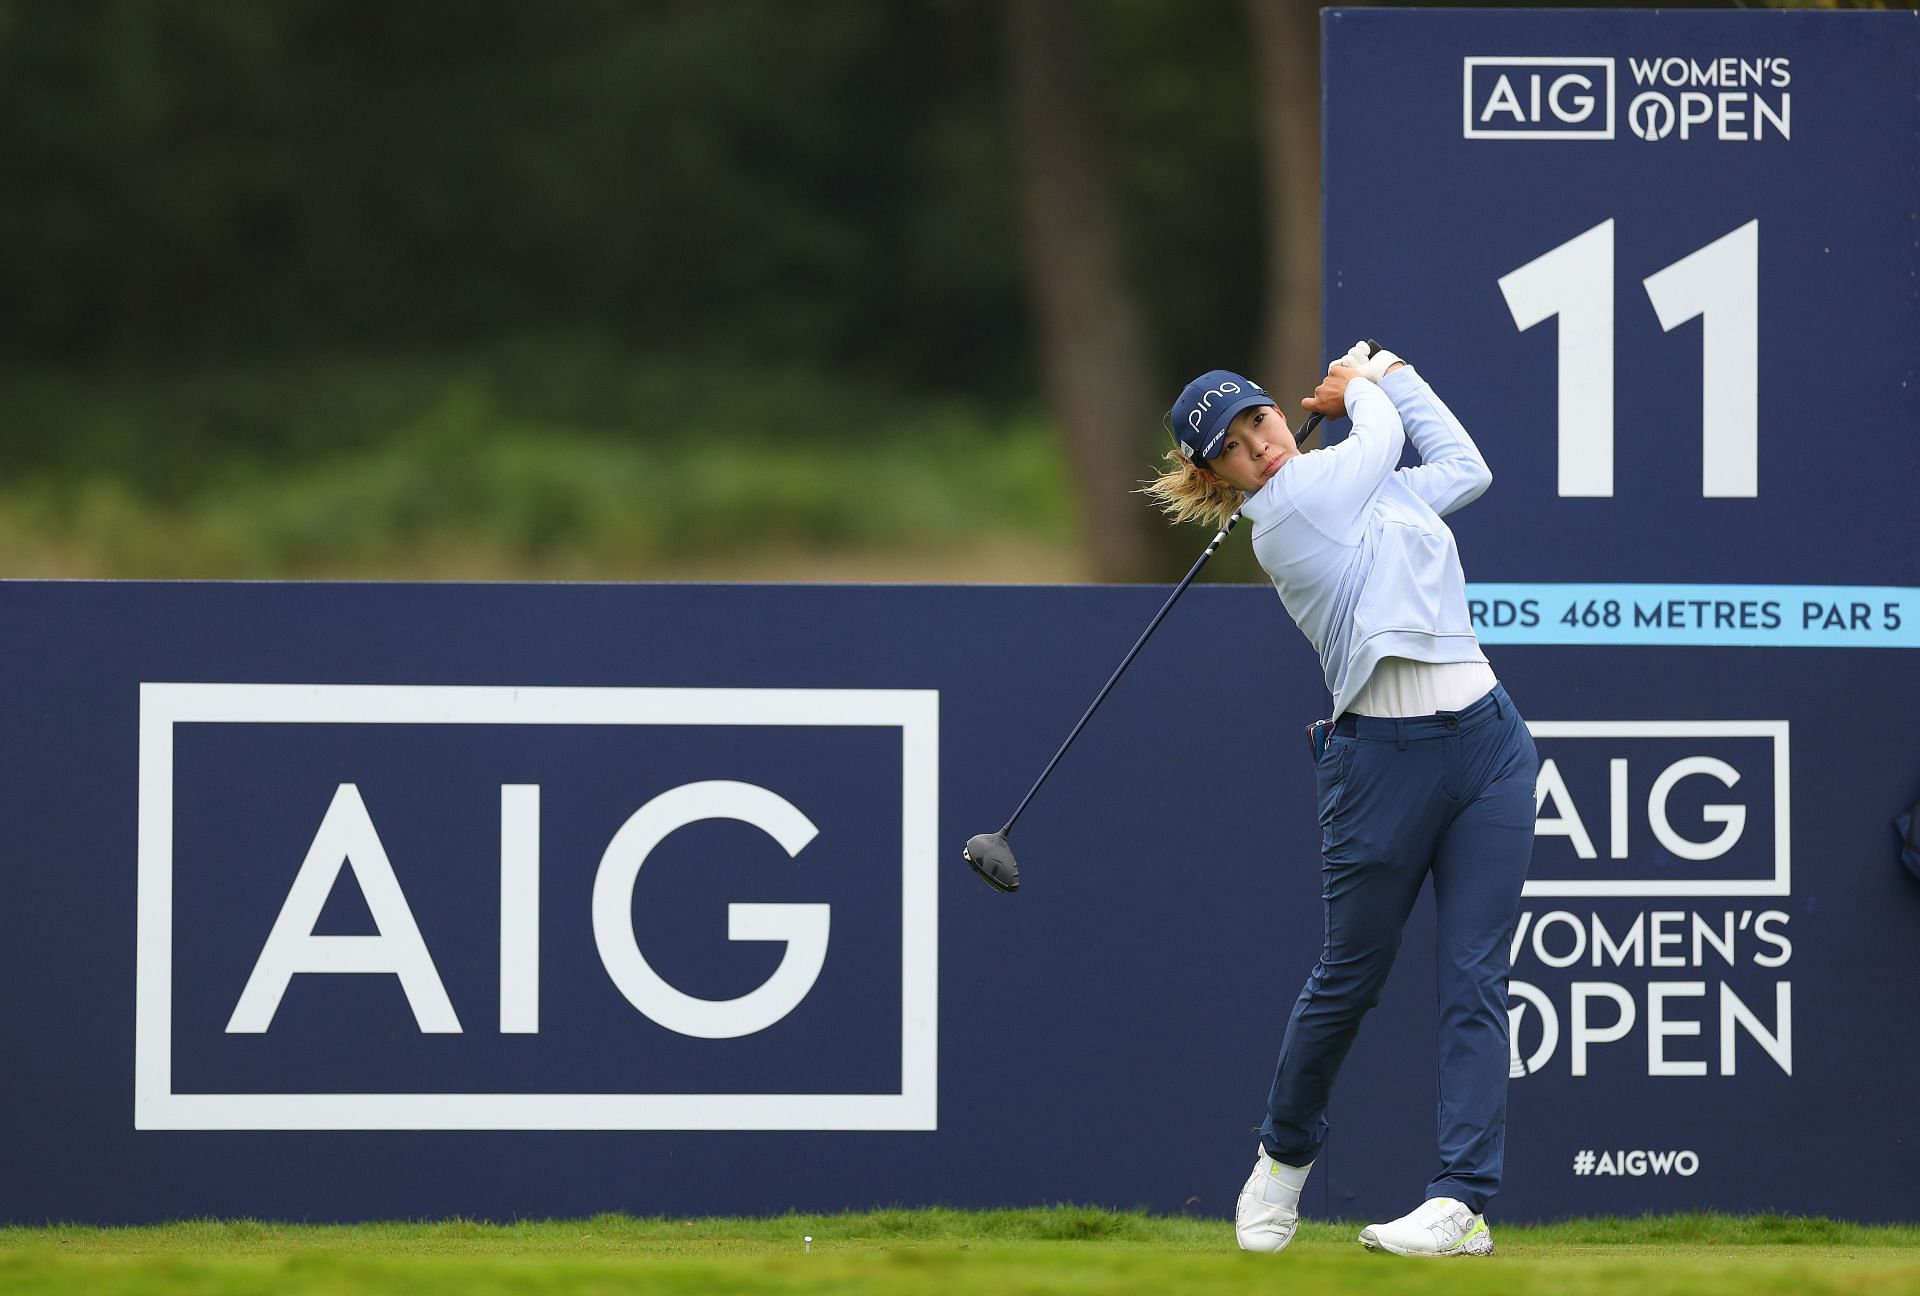 2023 AIG Women's Open Schedule, venue, top players, prize money and more